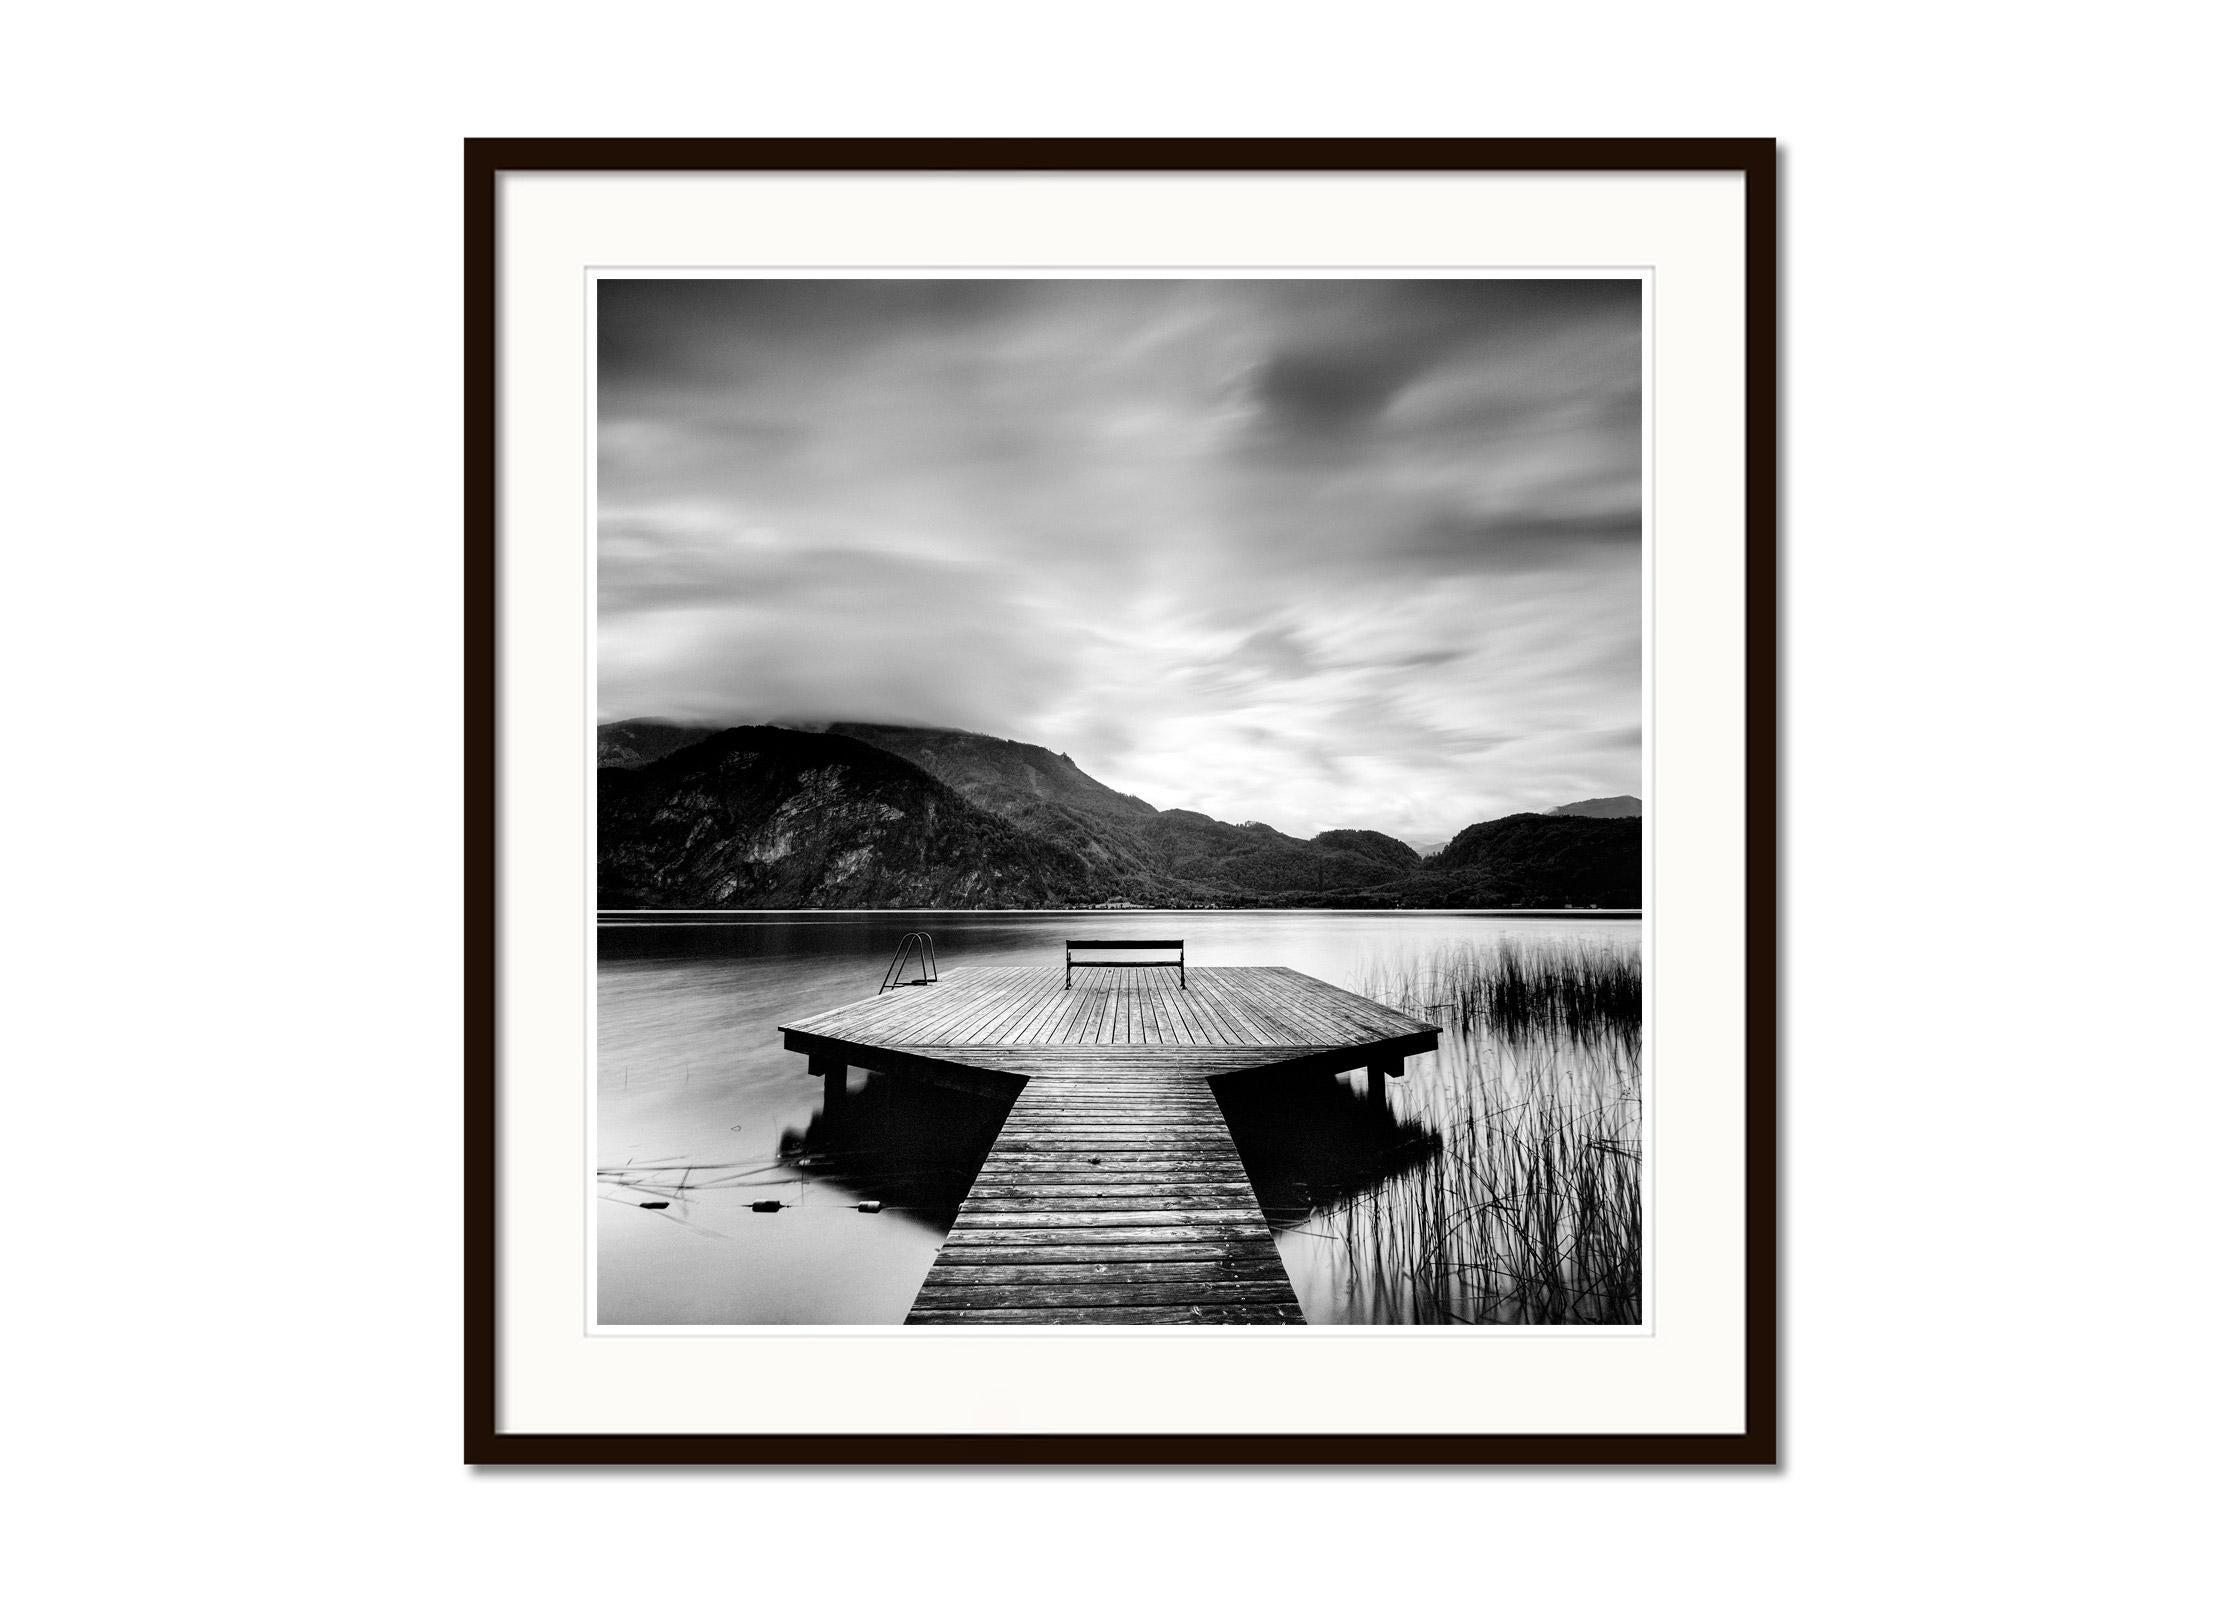 Wood Pier, lake, cloudy, storm, black and white photography, fine art waterscape - Contemporary Photograph by Gerald Berghammer